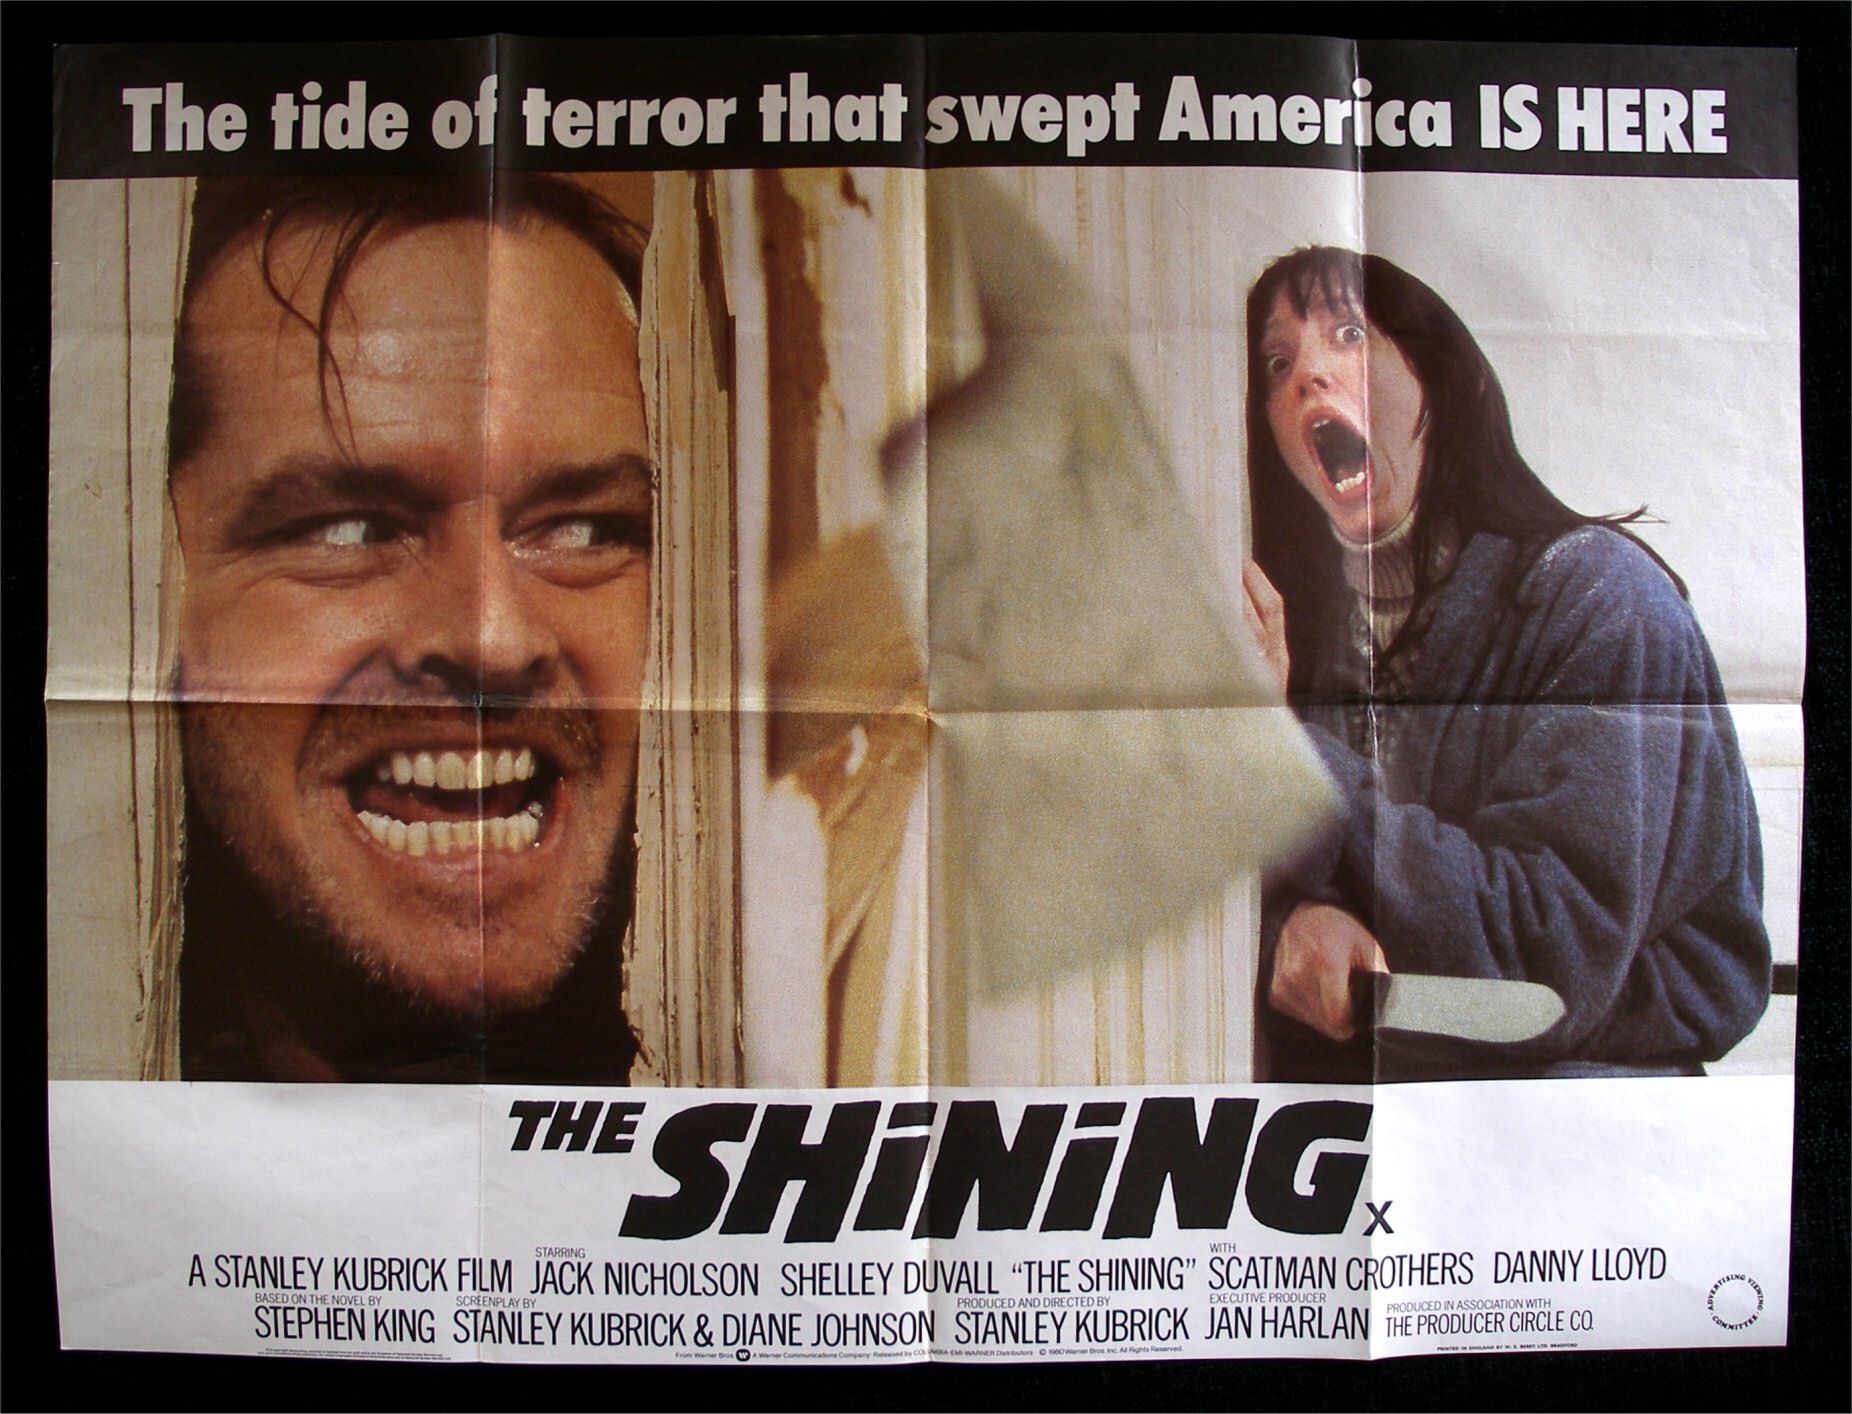 THE SHINING comes to Trailer Park Tuesday!